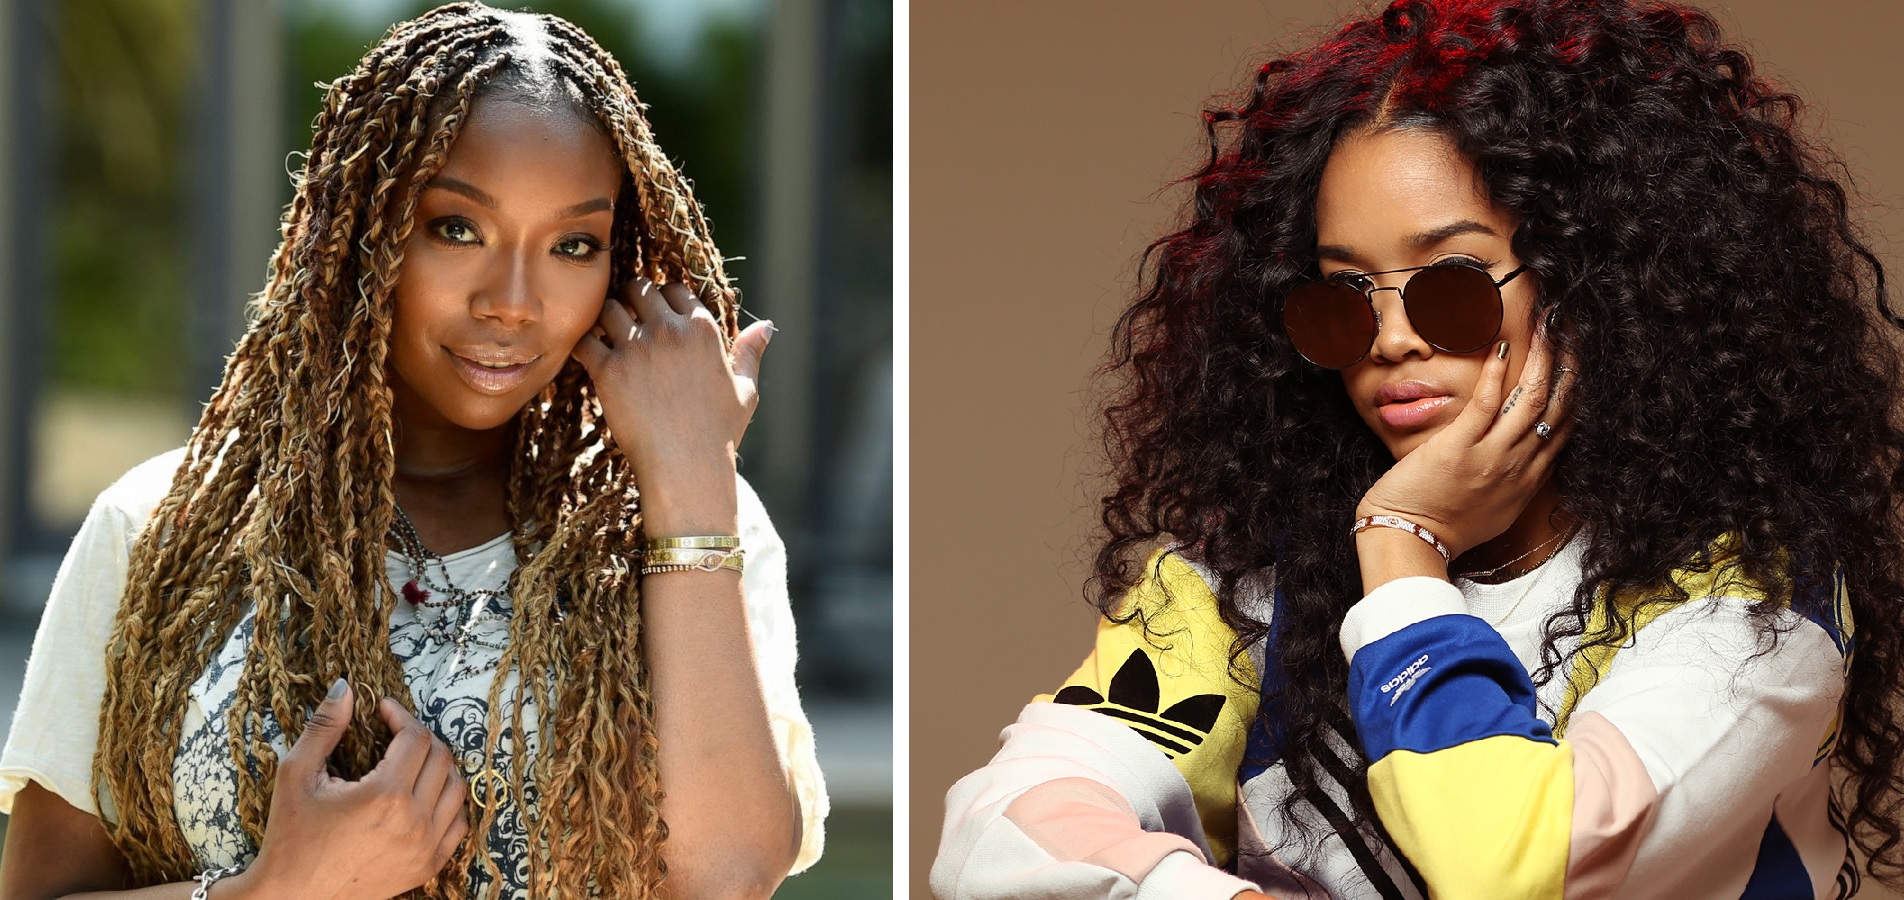 Confirmed: Brandy and H.E.R. Are Collaborating On New Song!